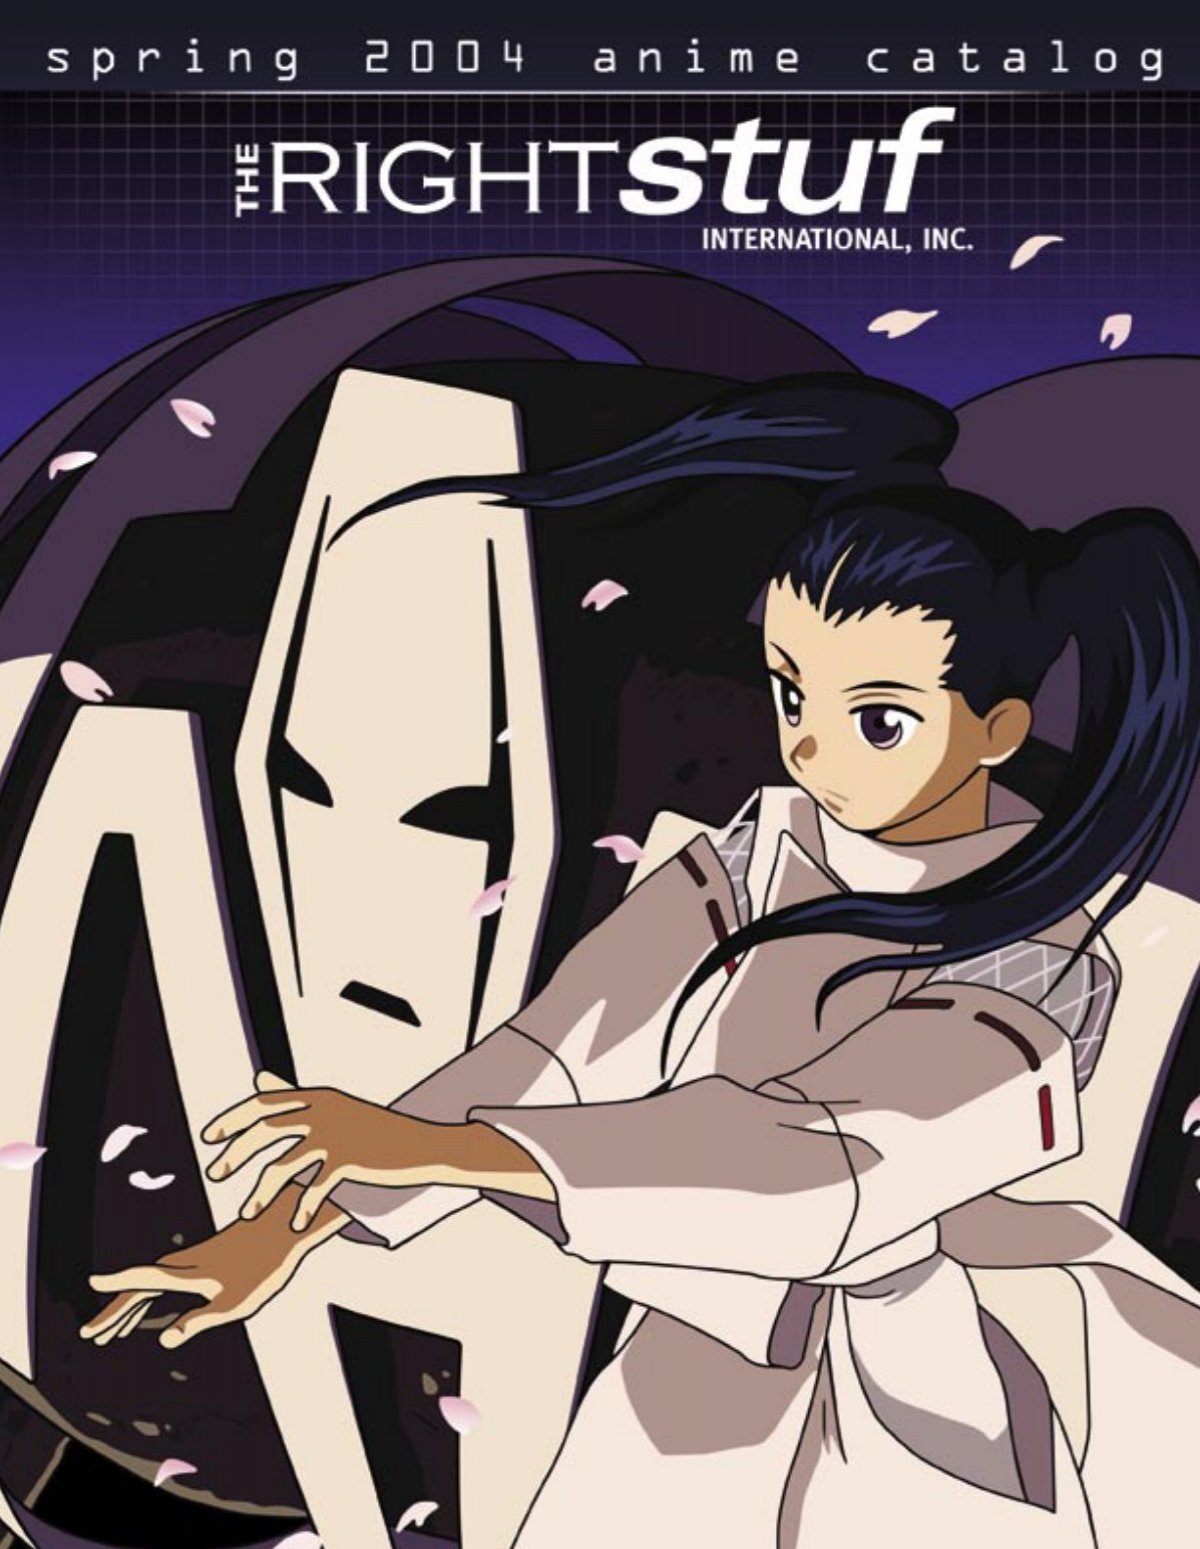 Colossalcon 2023 is happy to announce we are sponsored by Right Stuf Anime!  Check them out for all your anime needs! @rightstufanime | Instagram